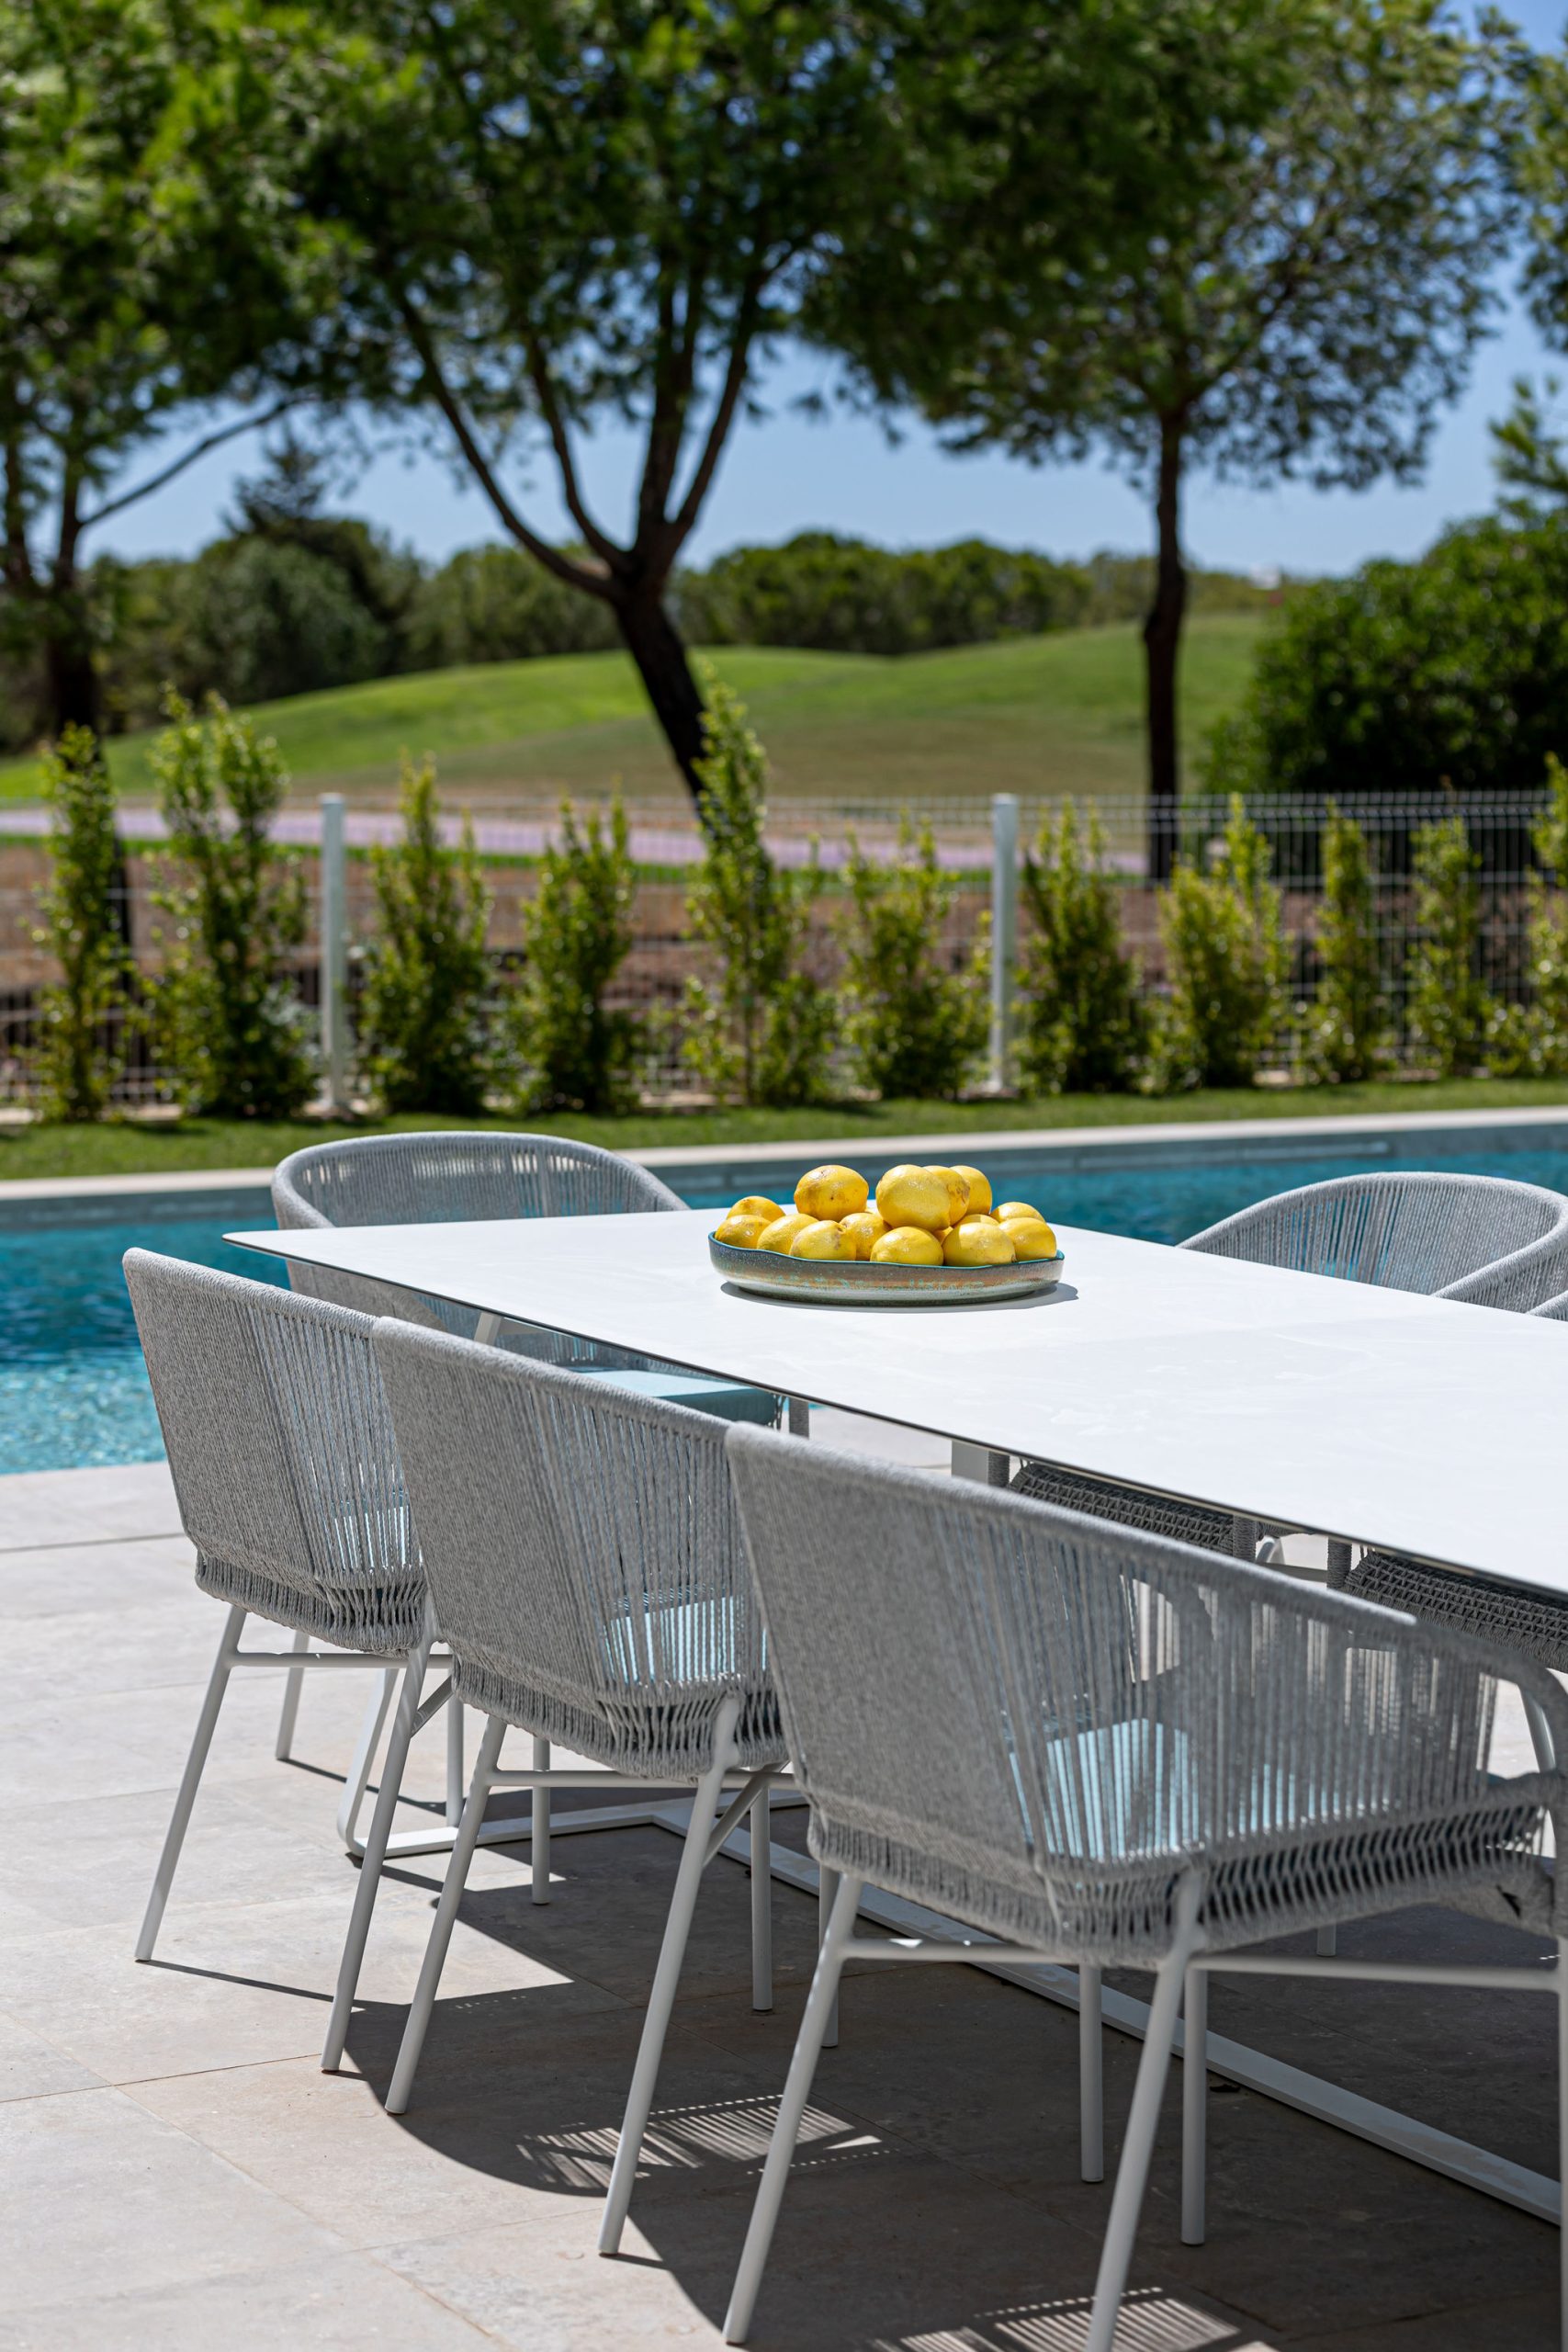 Outdoor premium brand dining table with woven chairs and golf course views